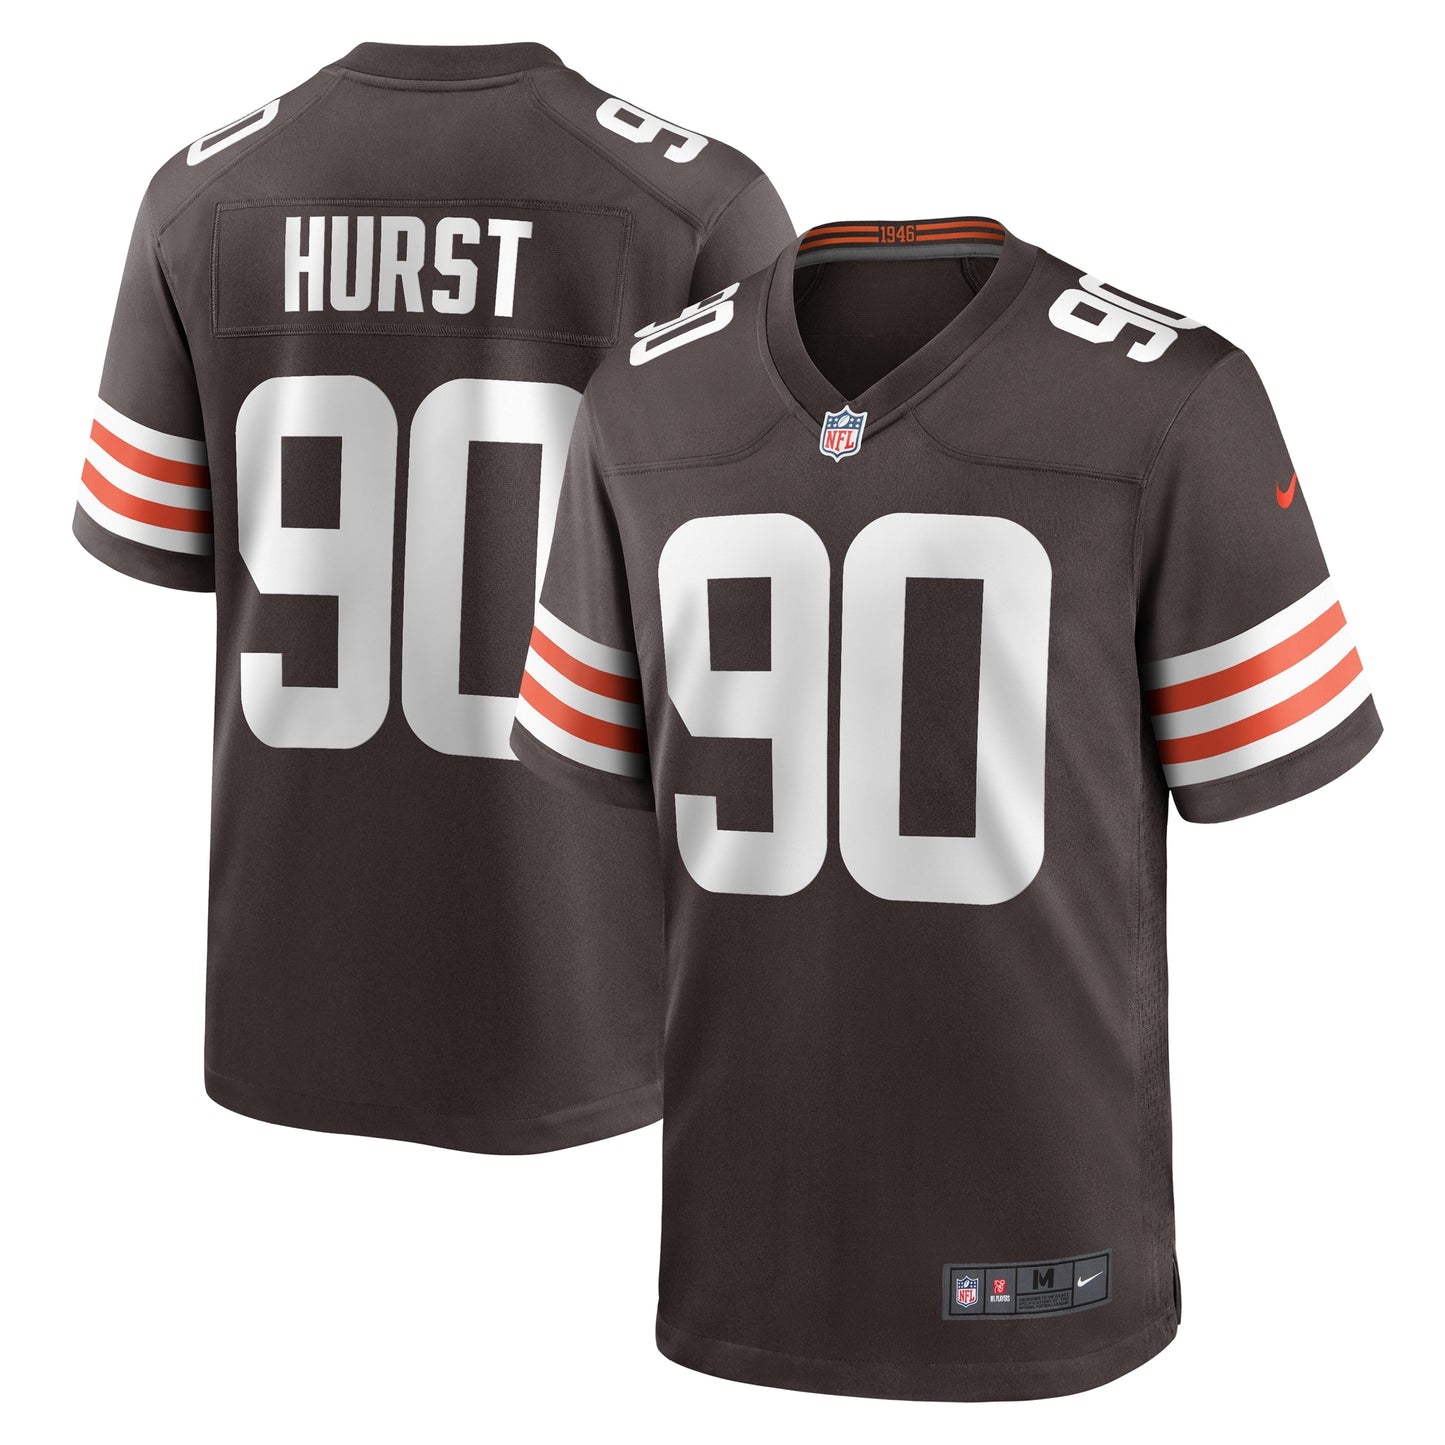 Maurice Hurst Cleveland Browns Nike Game Player Jersey - Brown